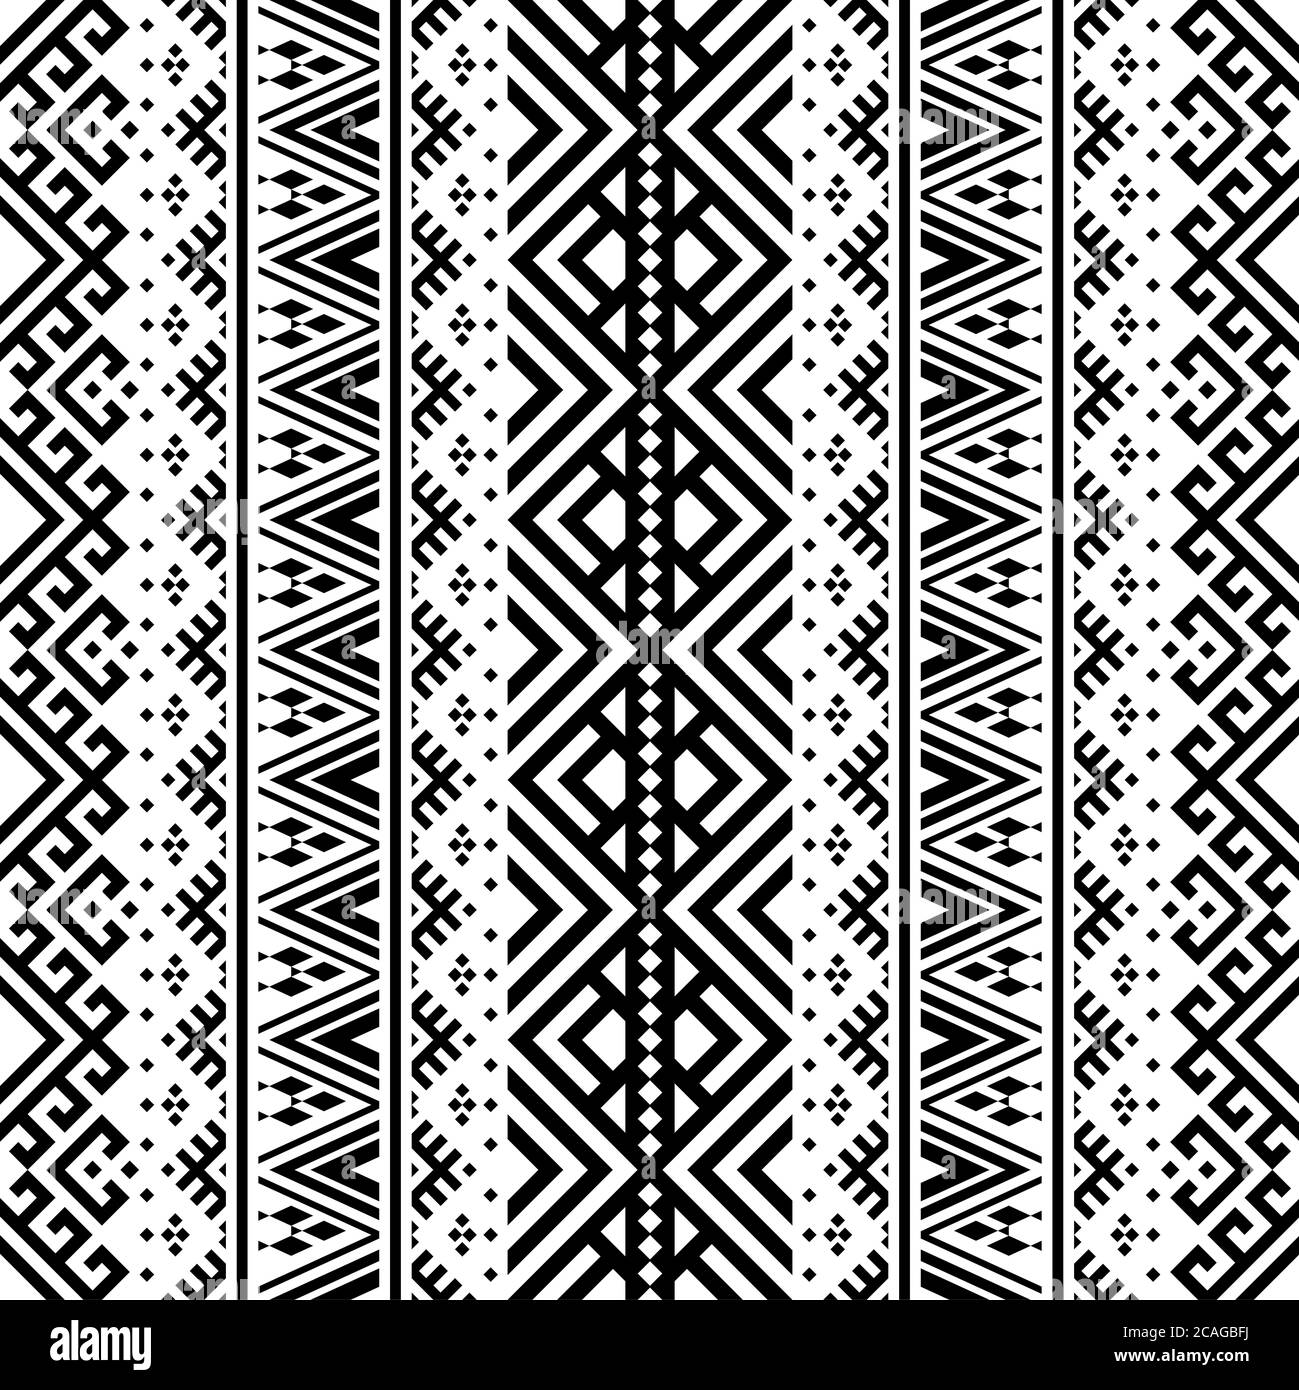 Traditional texture design made of seamless ethnic pattern design ...